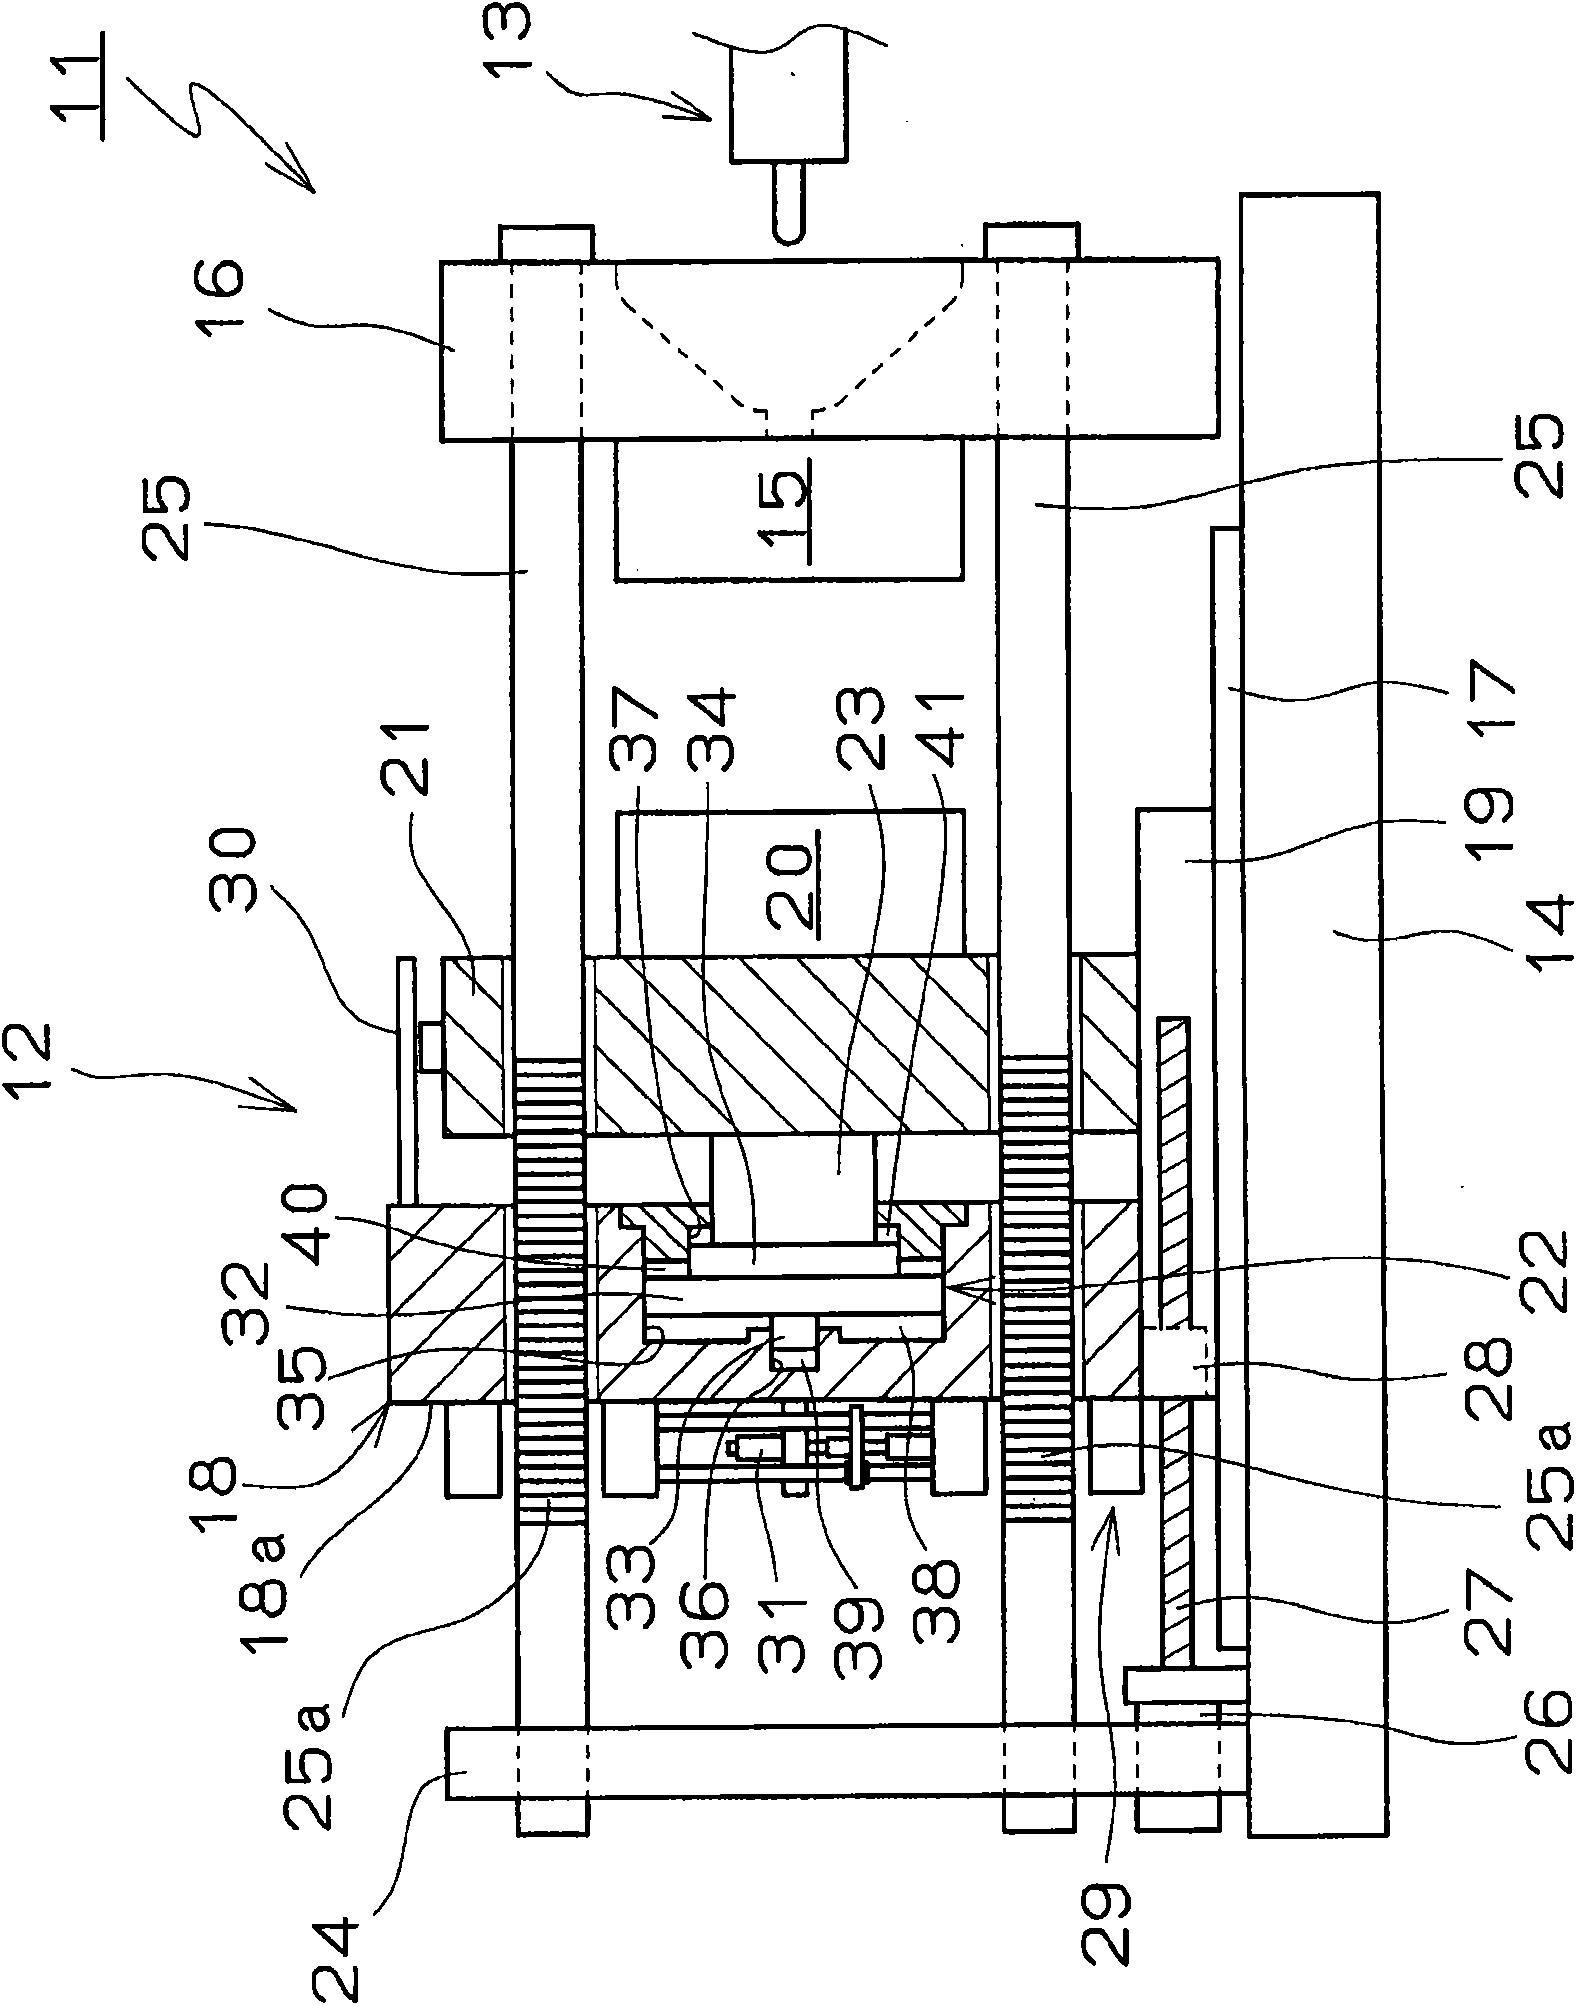 A mold clamping device and an operating method of the mold clamping device